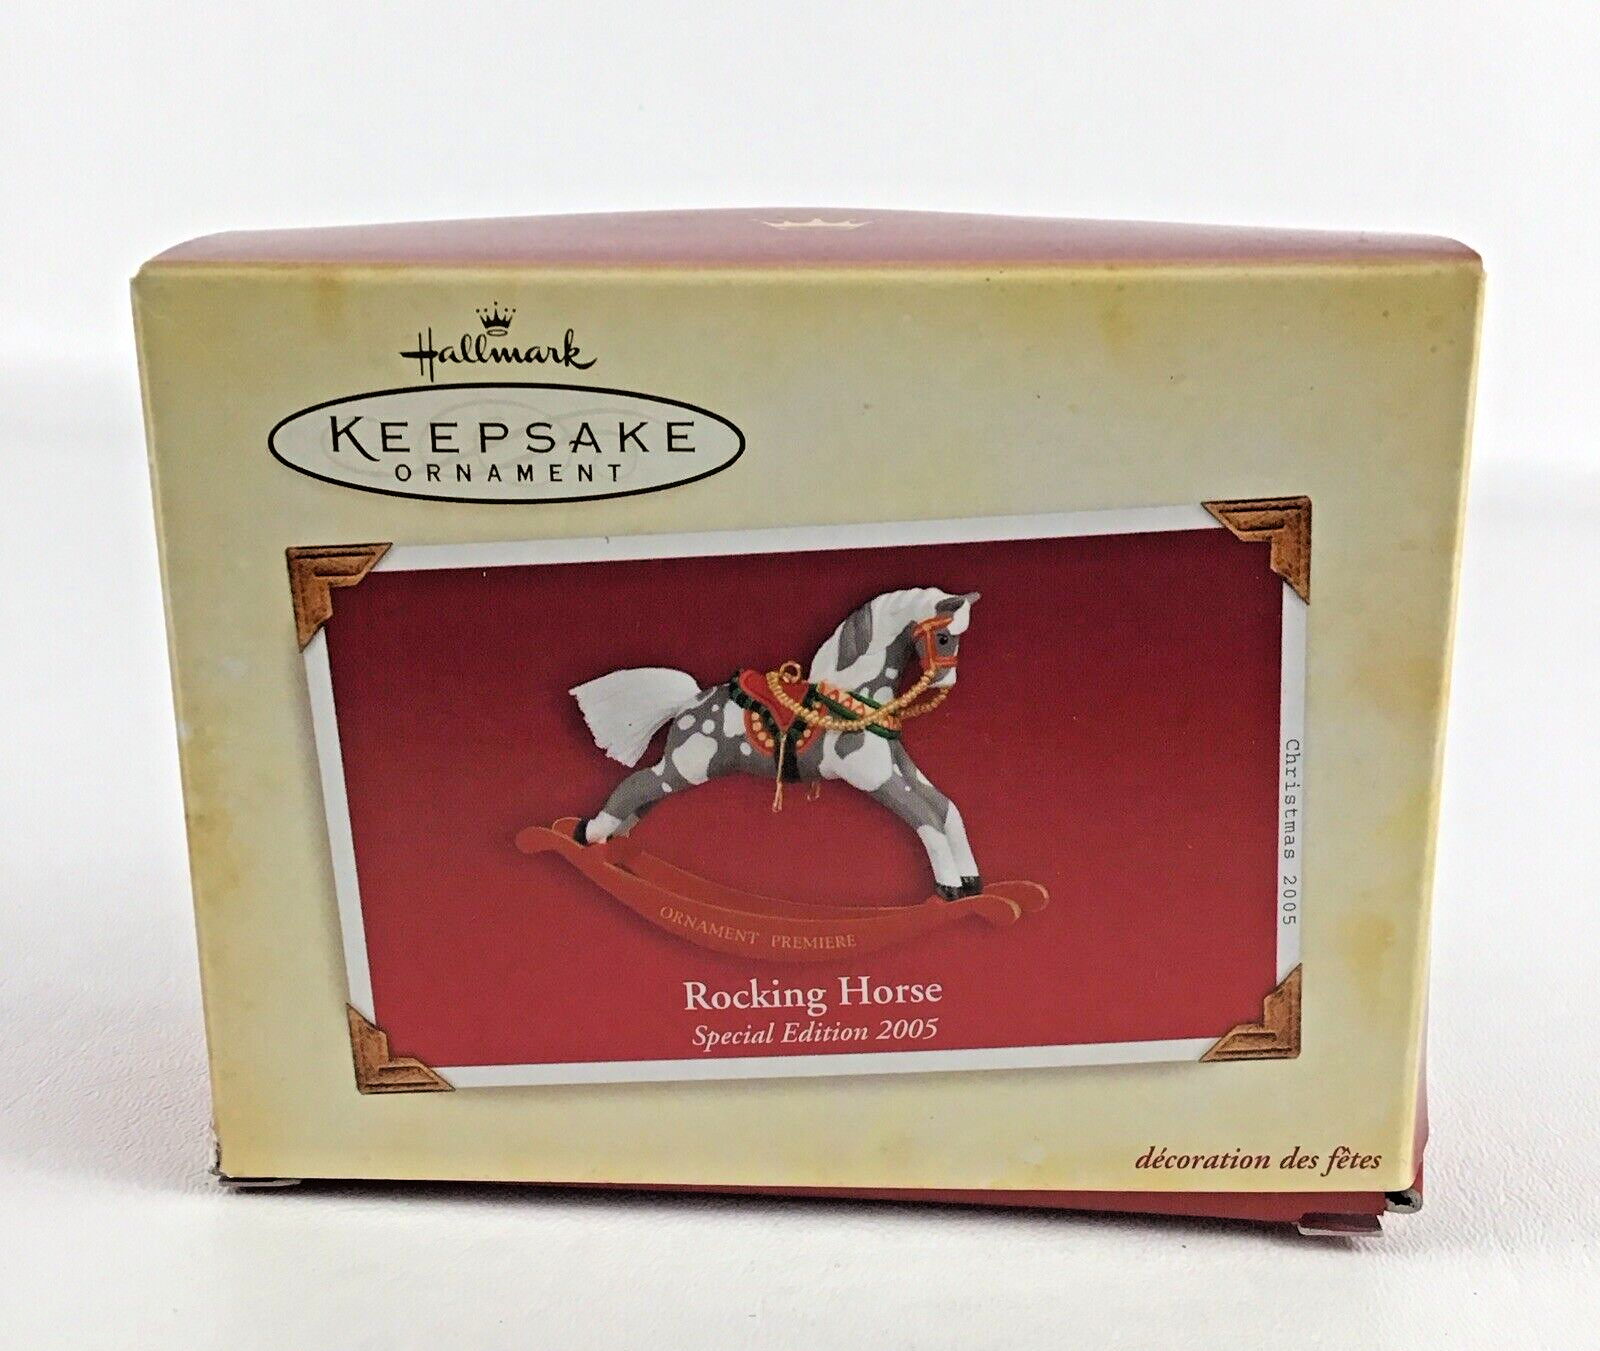 Primary image for Hallmark Keepsake Christmas Ornament Rocking Horse Special Edition New 2005